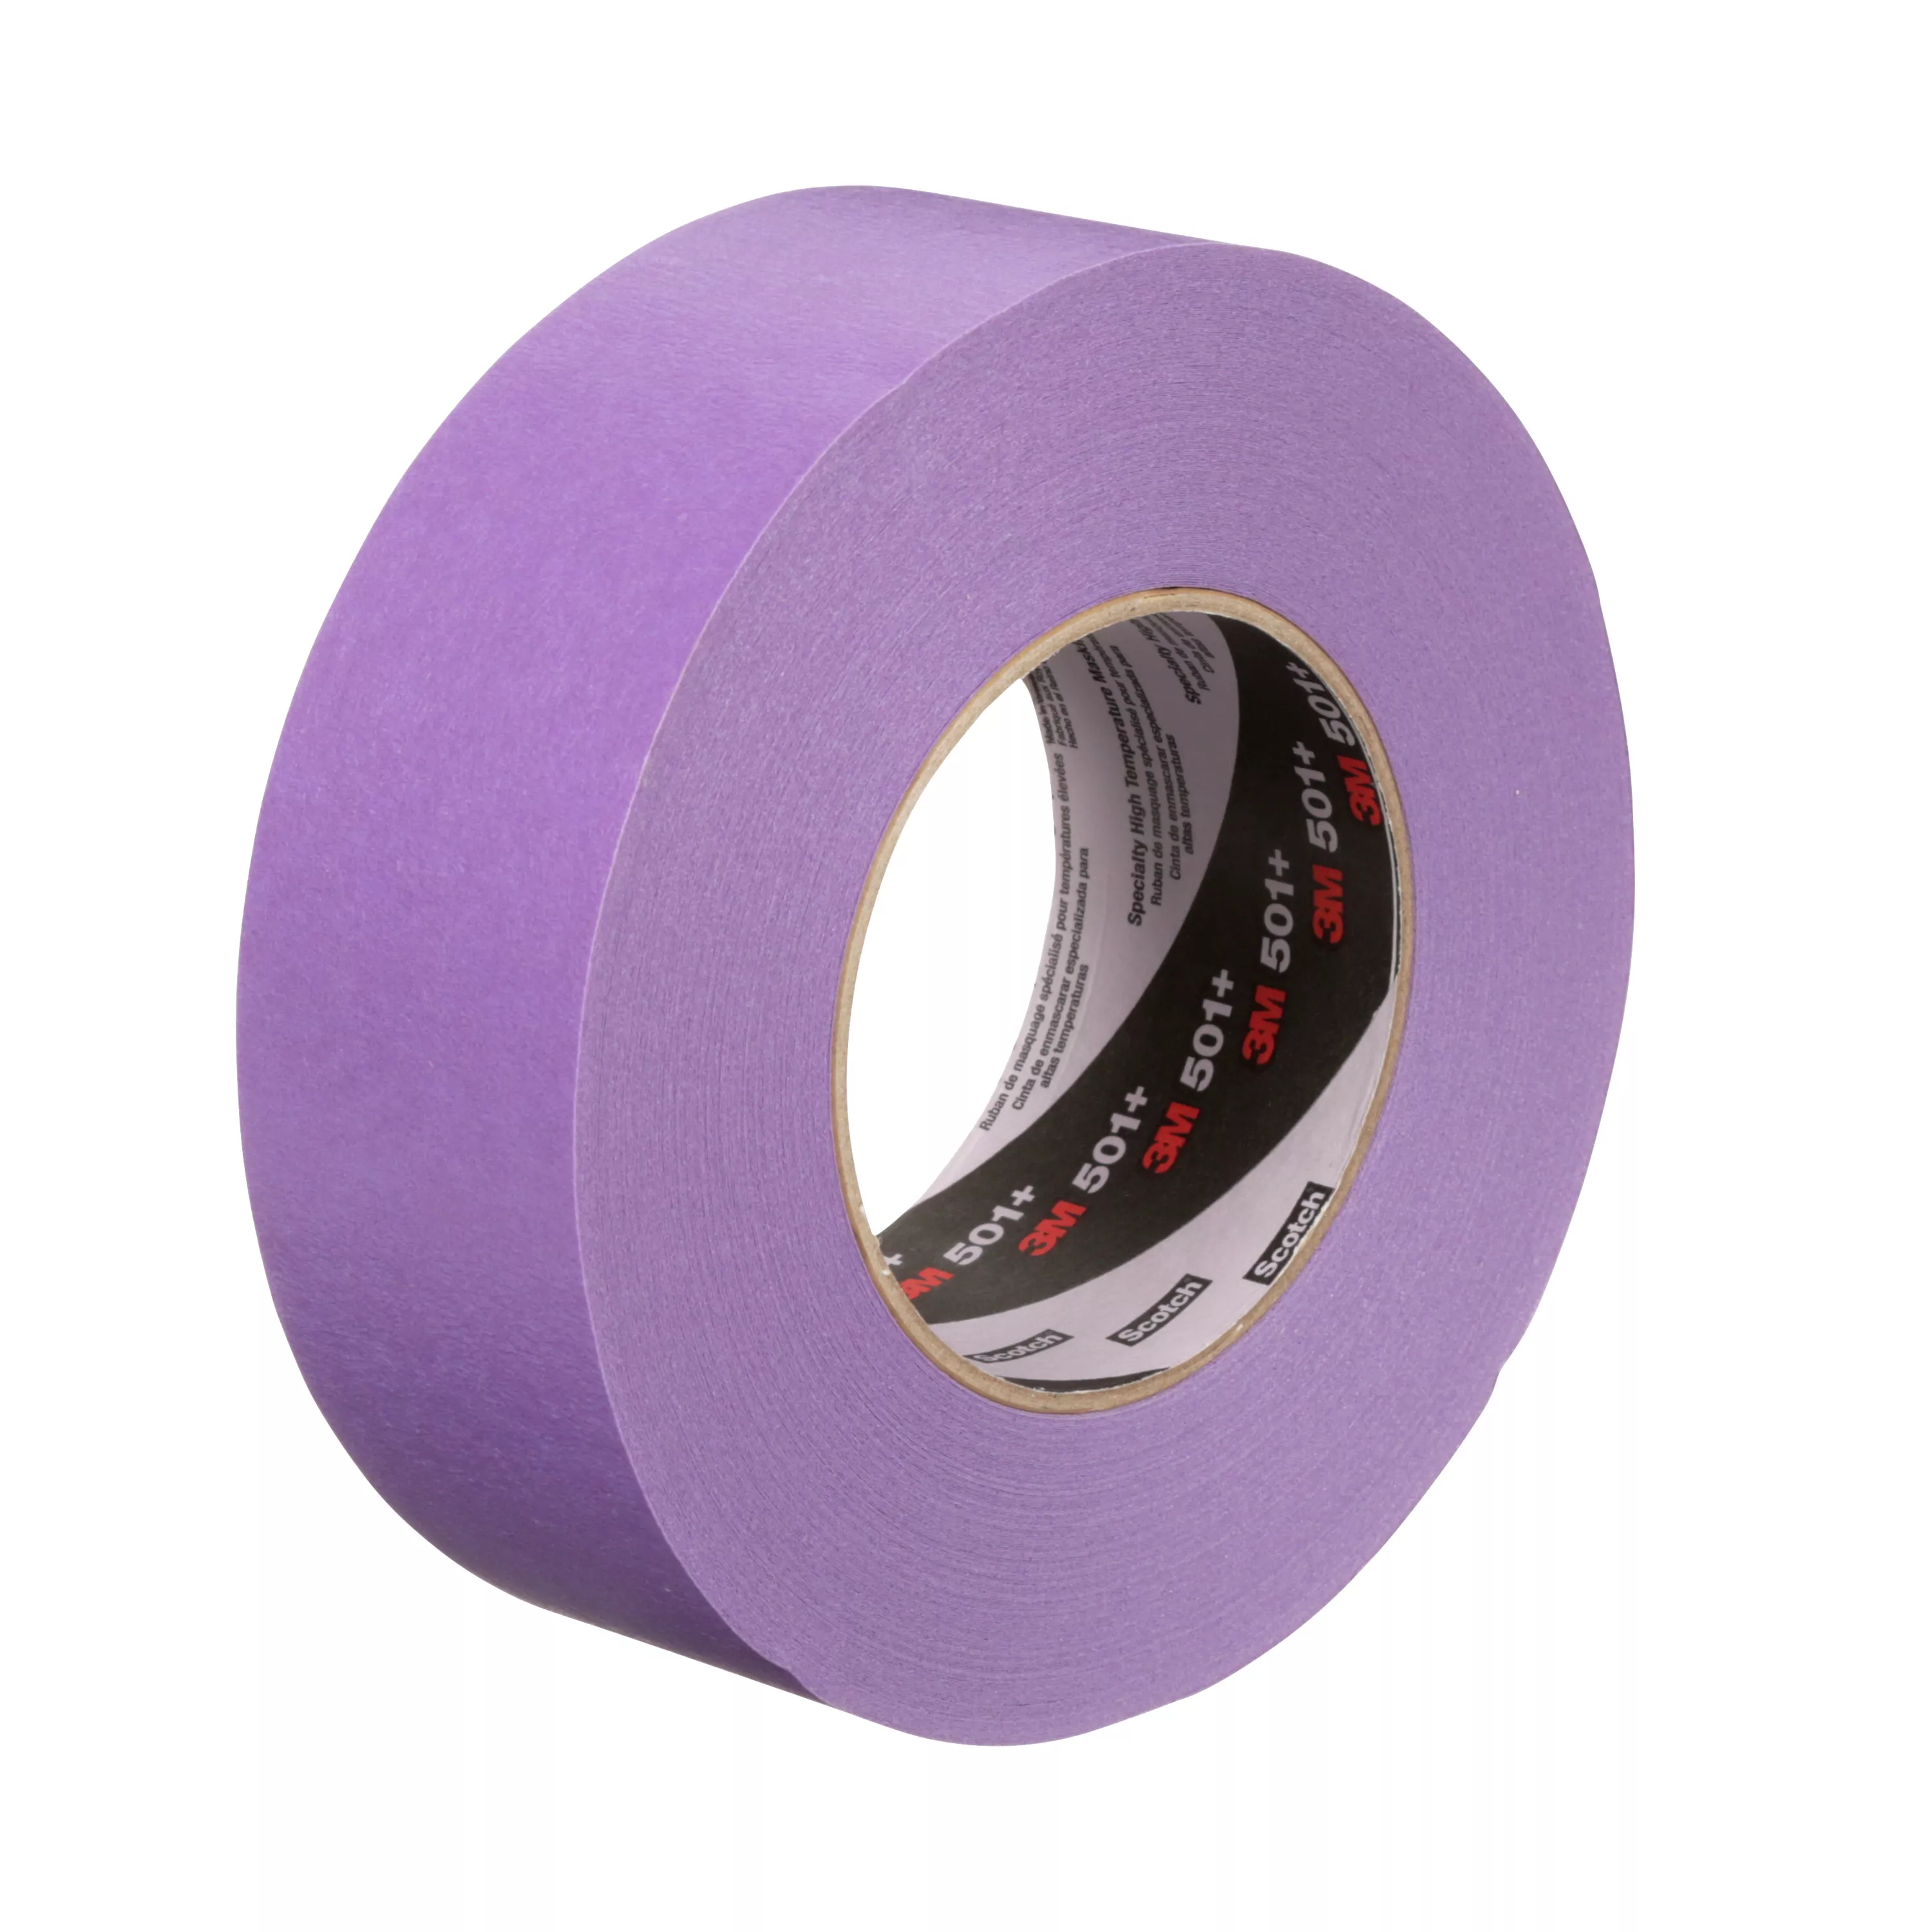 SKU 7100086764 | 3M™ Specialty High Temperature Masking Tape 501+